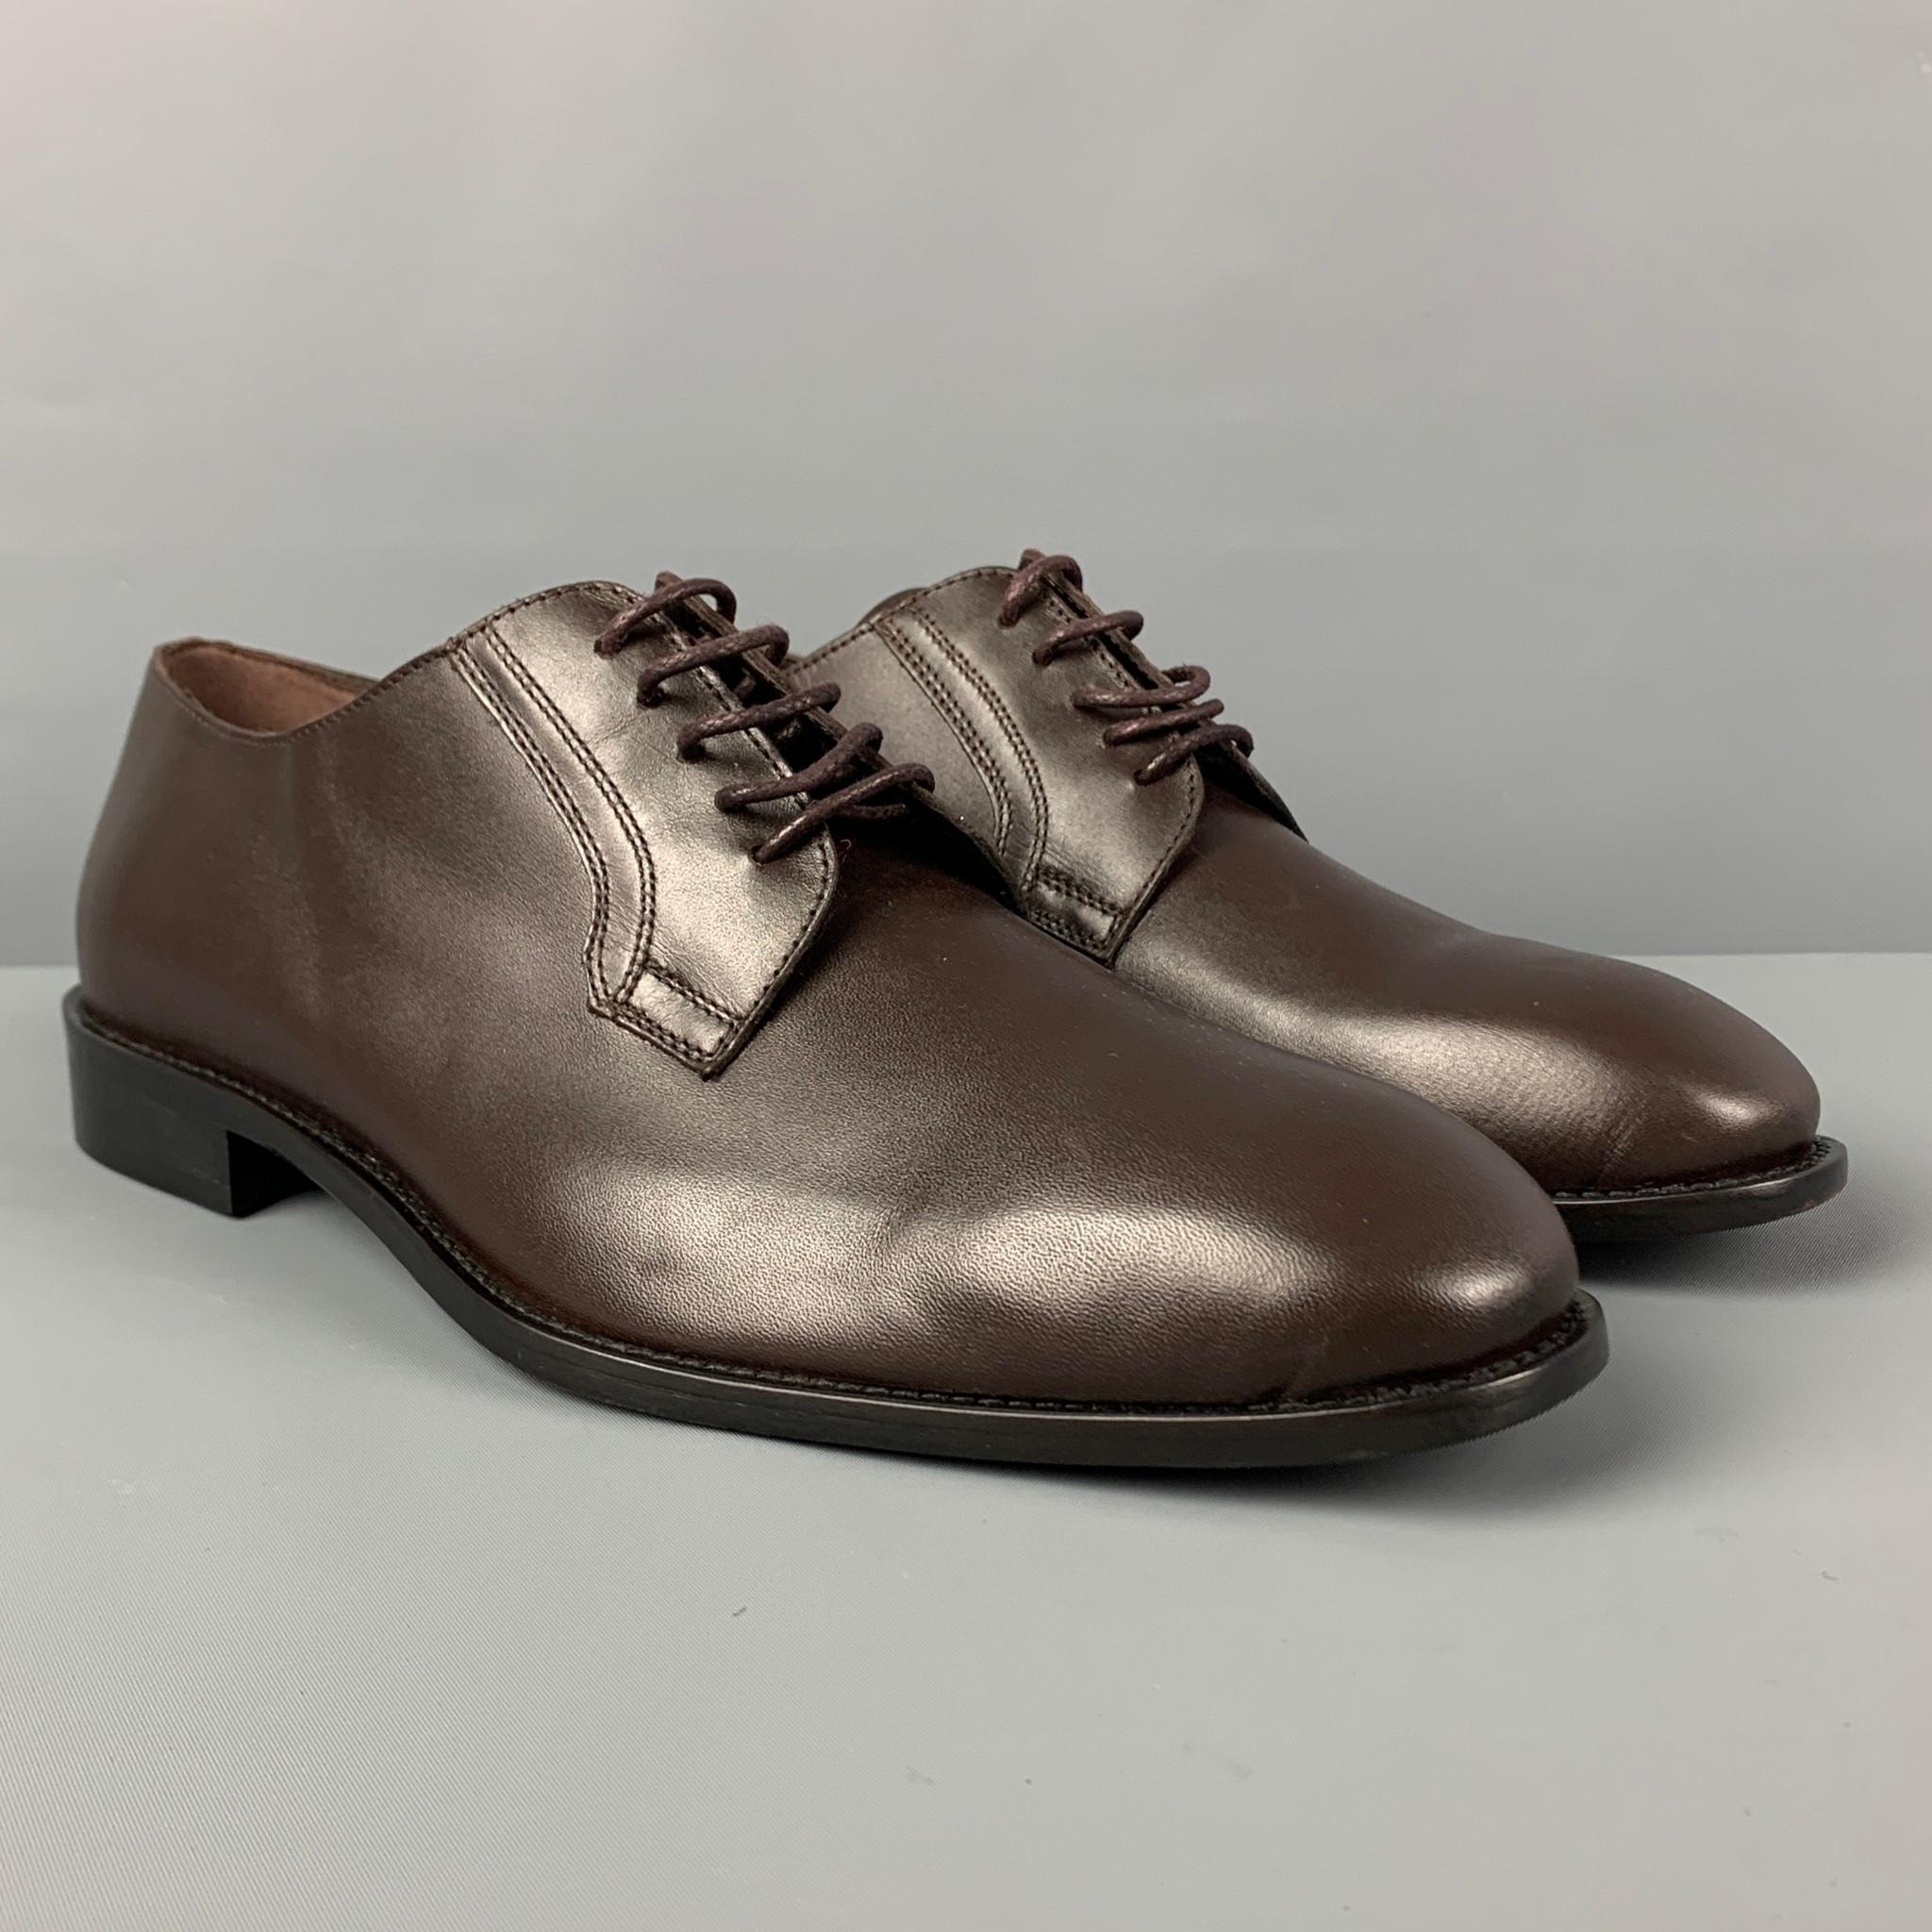 BRUNO MAGLI shoes comes in a dark brown leather featuring a classic style anda lace up closure. Includes box. Made in Italy. 

Very Good Pre-Owned Condition.
Marked: 43

Outsole: 12.25 in. x 4.25 in. 